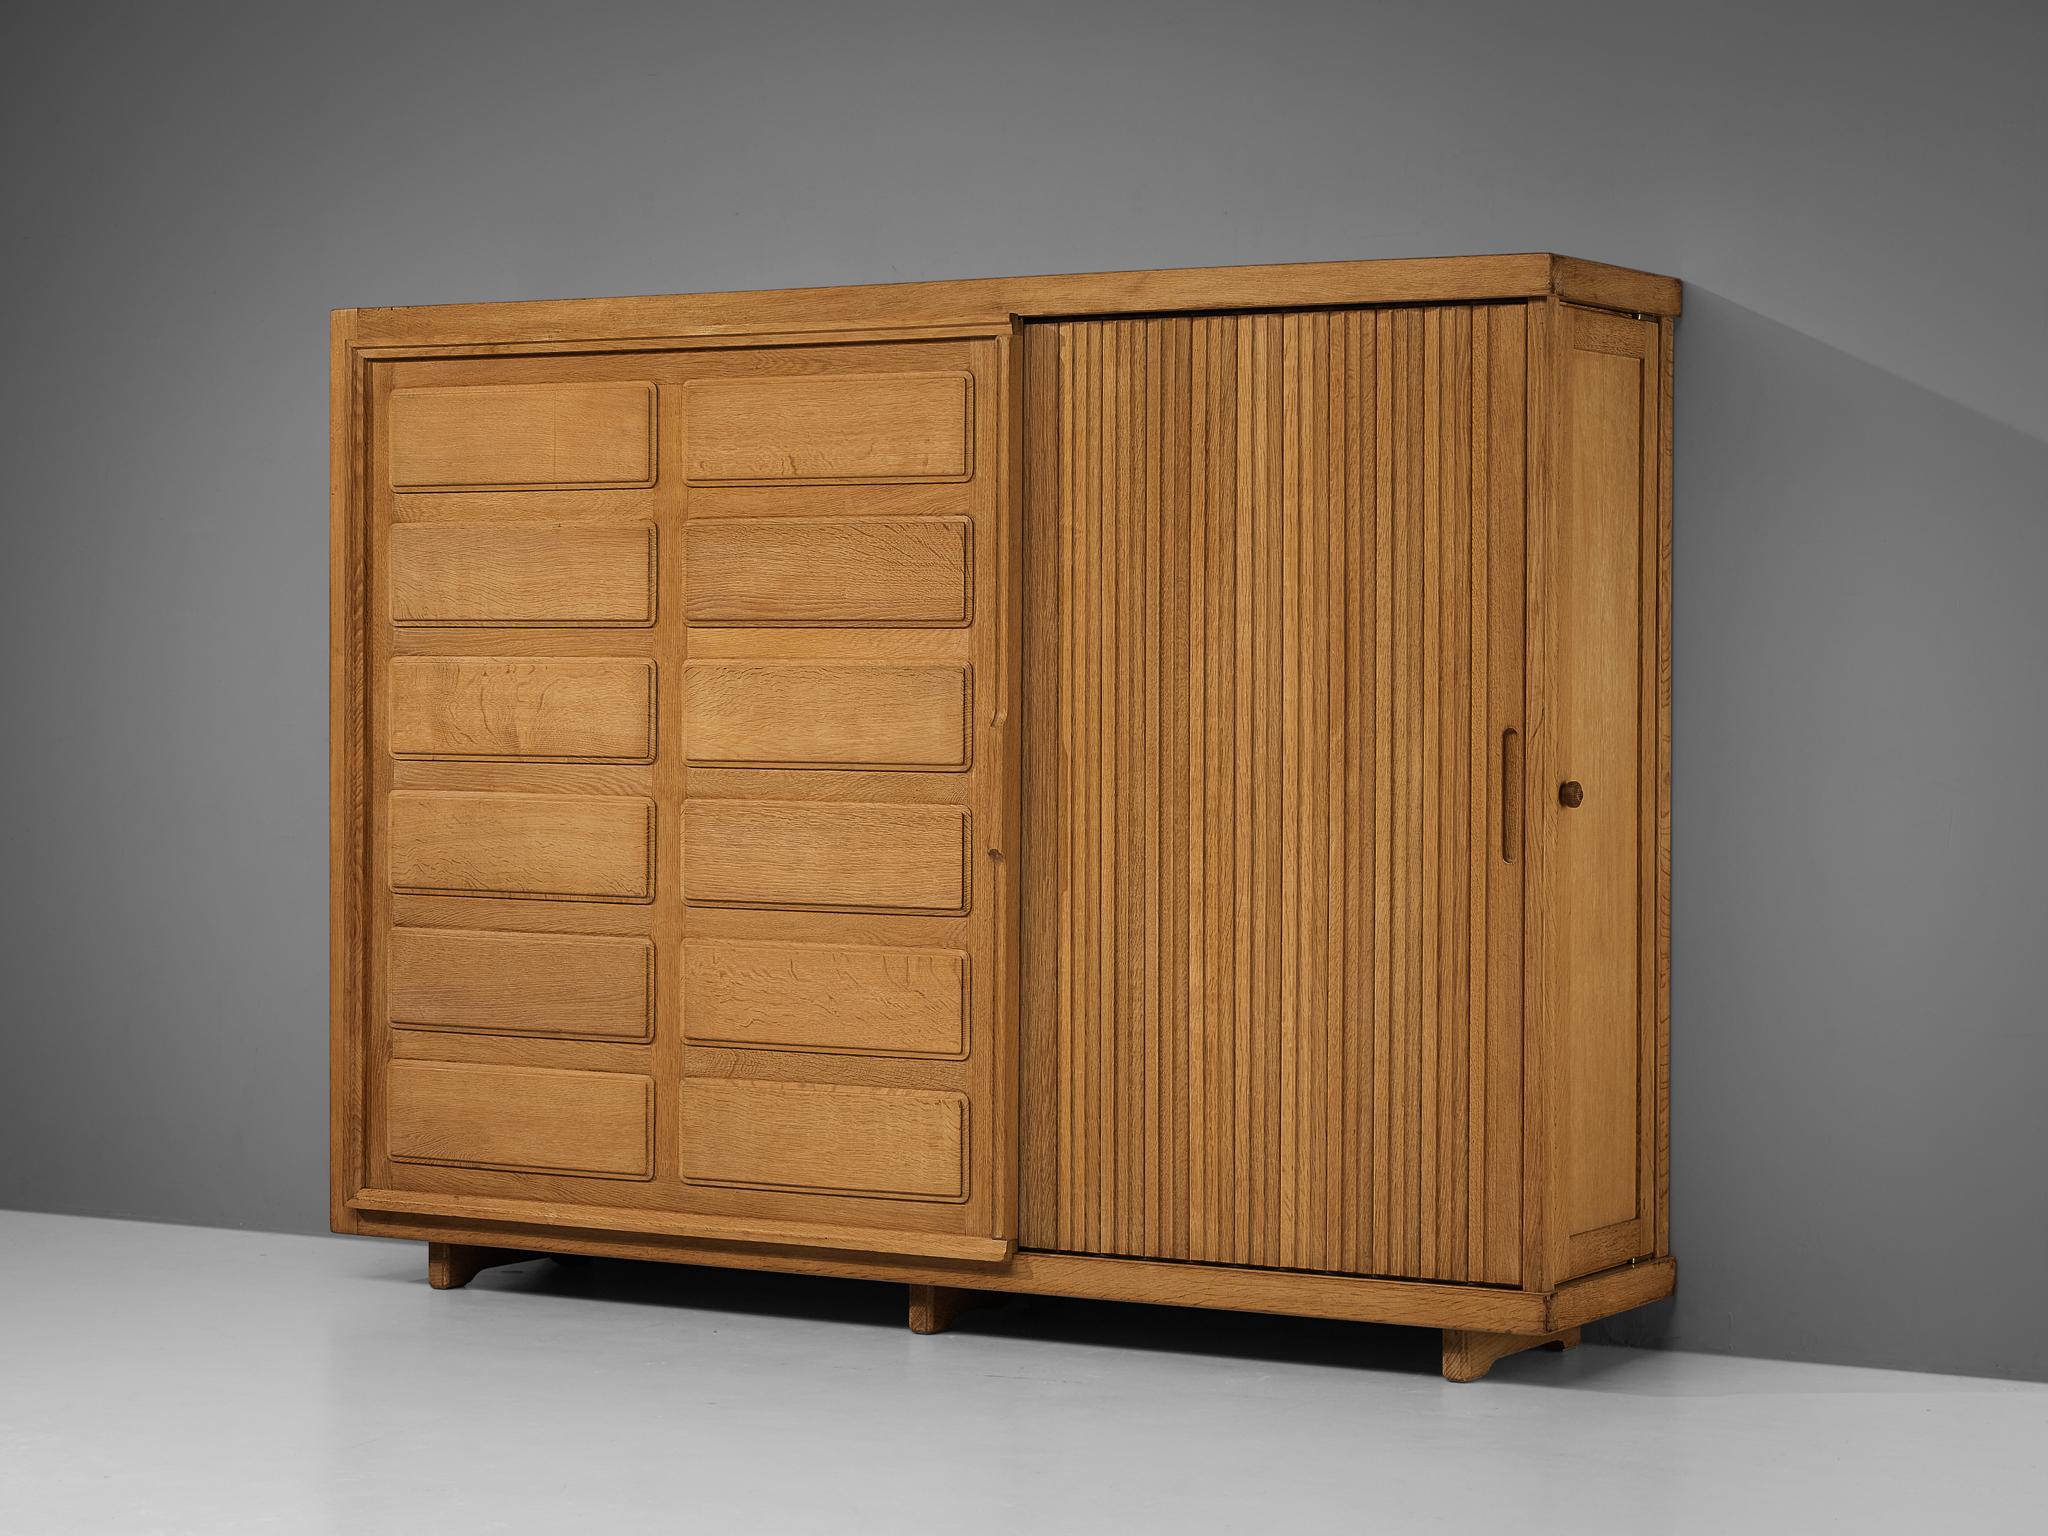 Guillerme et Chambron for Votre maison, armoire, oak, France, 1960s

This grandiose wardrobe is a good example of excellent woodworking by virtue of the graphical designed door panels illustrating elongated, vertical lines and geometrical wooden